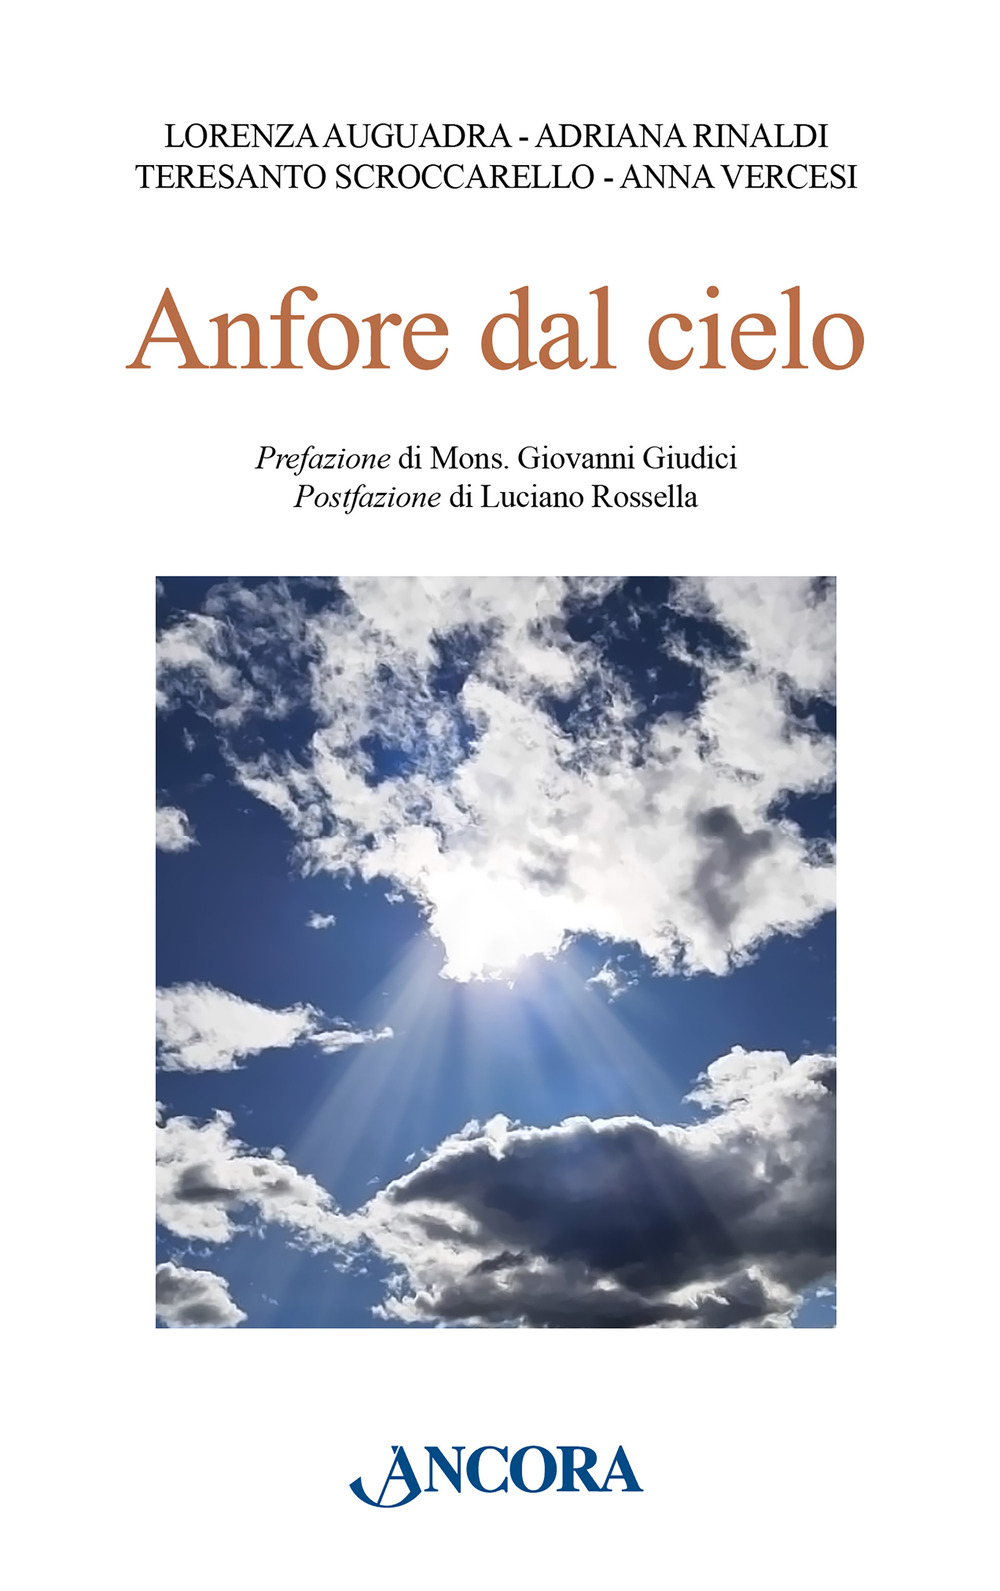 Anfore dal cielo